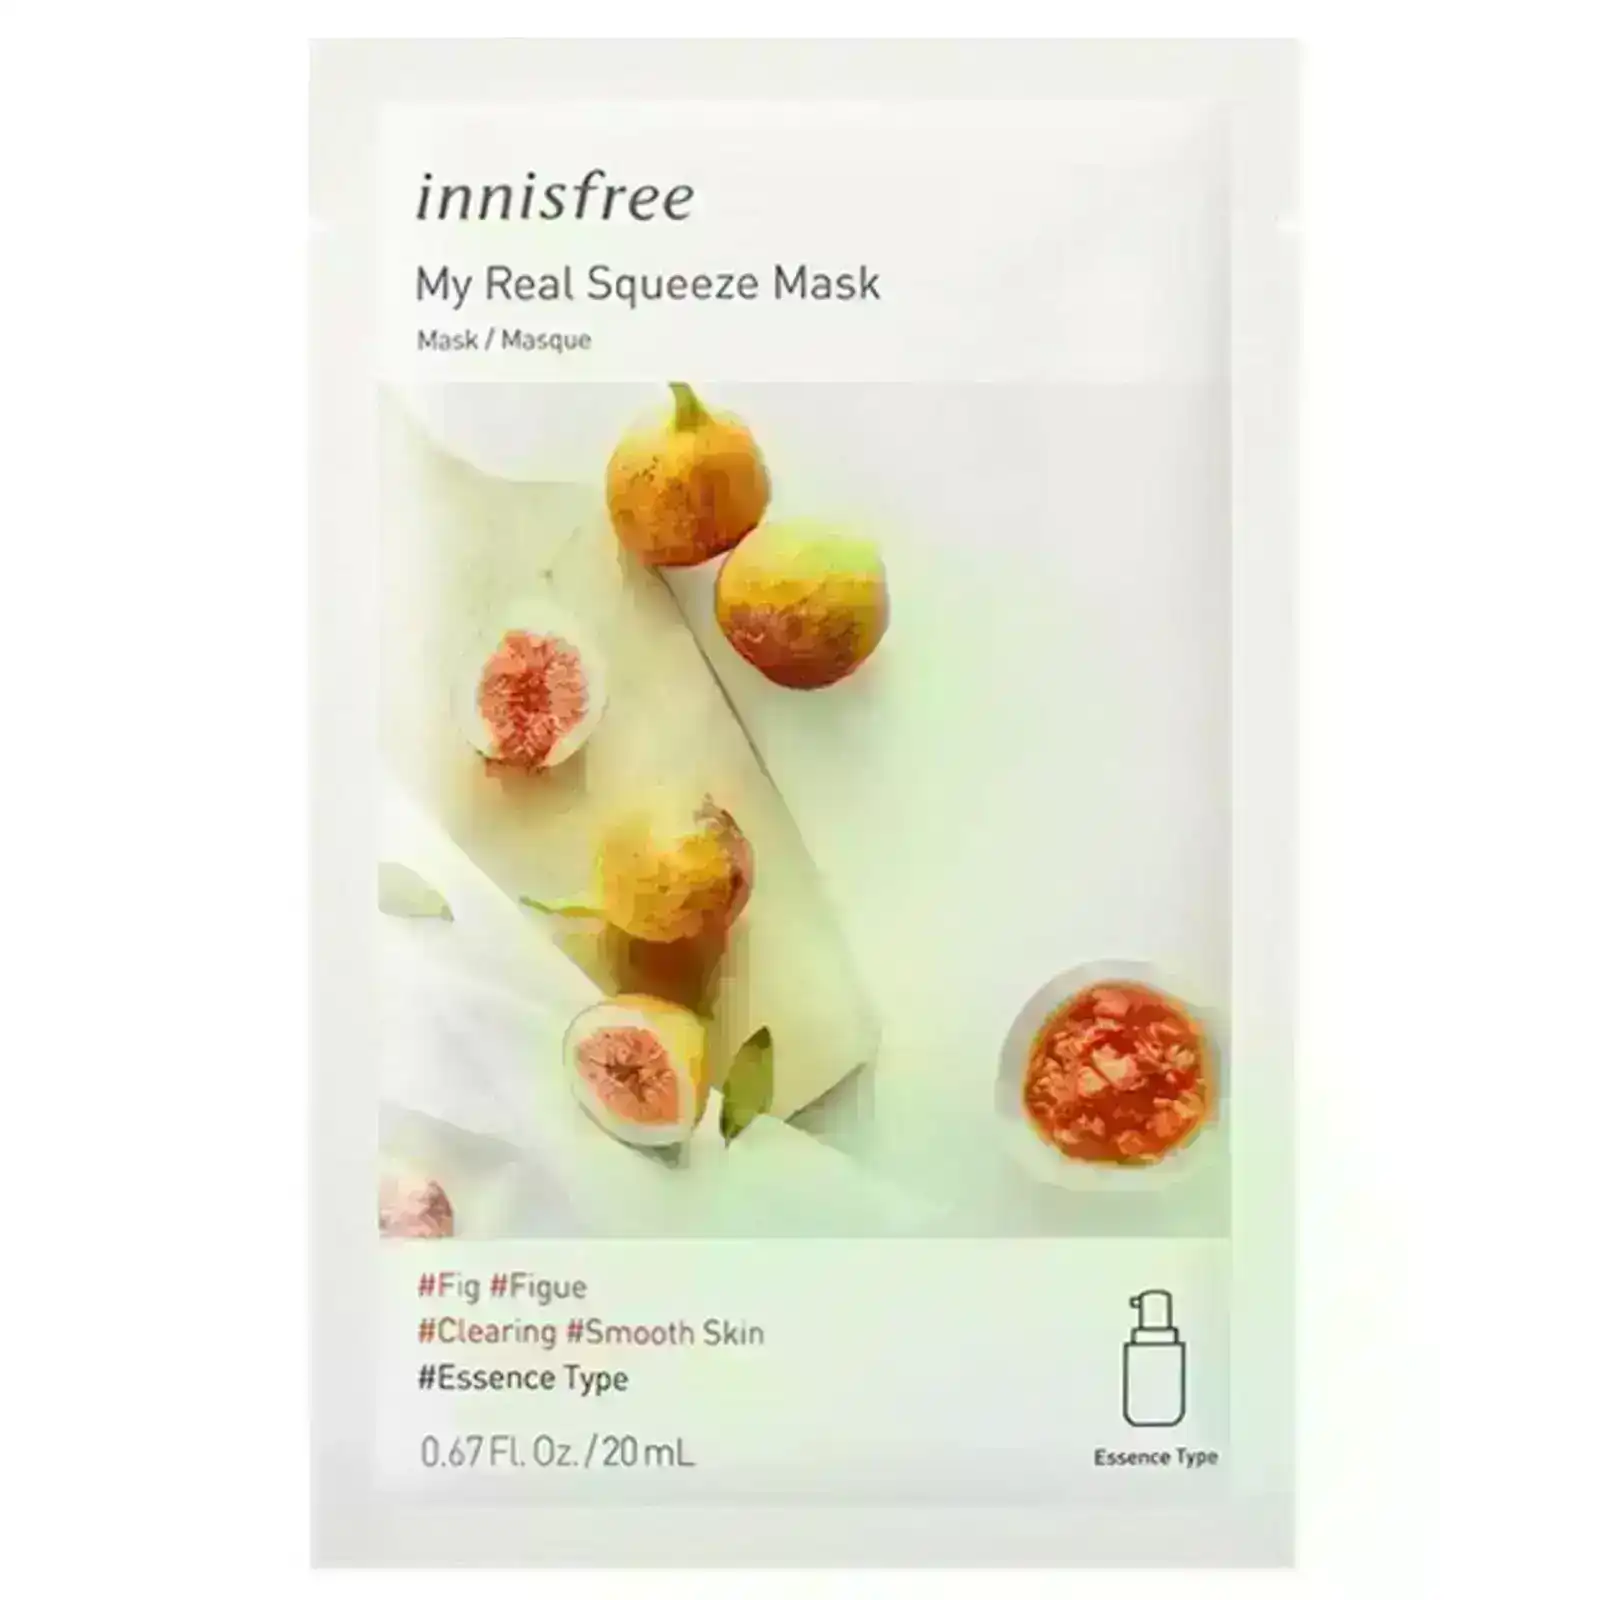 Innisfree My Real Squeeze Mask Fig 1 Sheet Face Mask, Hydrating, Moisturising Essence